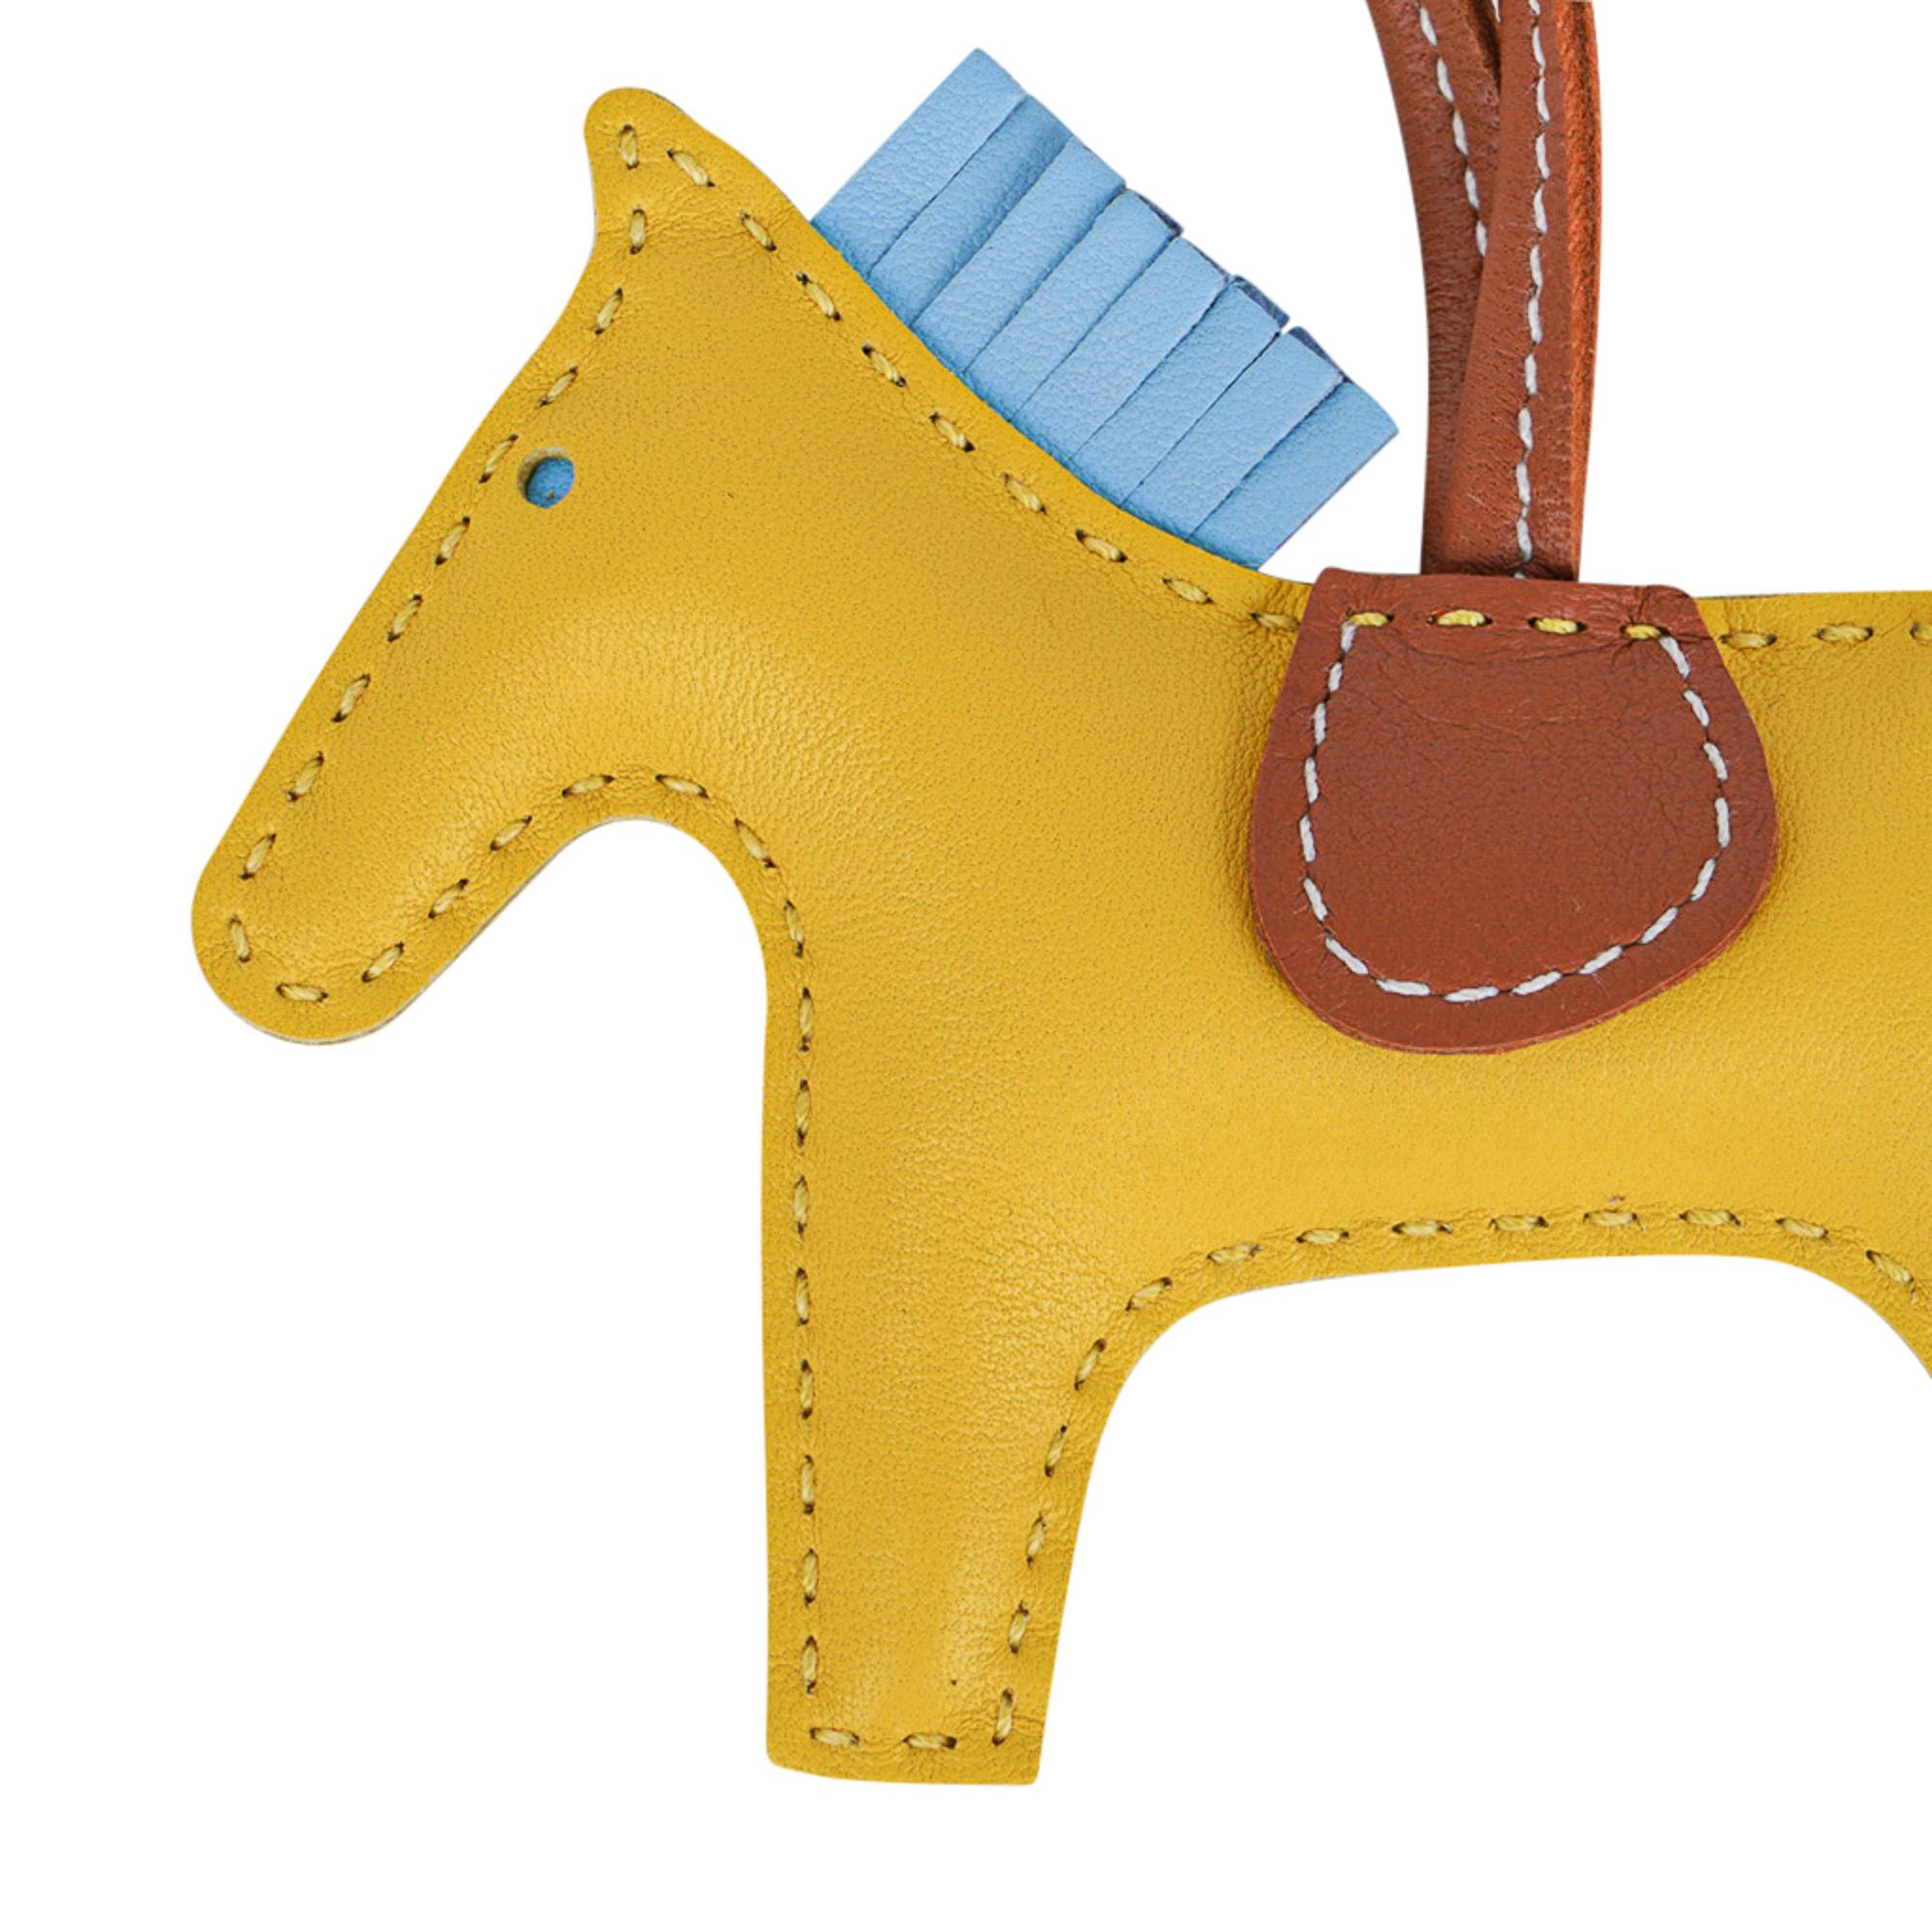 Mightychic offers a guaranteed authentic coveted Hermes PM Rodeo bag charm featured in Jaune de Naples, Blue Celeste and Gold.
Charming and playful she easily adorns a myriad bag colors in your fabulous collection. 
Skin is Milo lambskin.
Signature